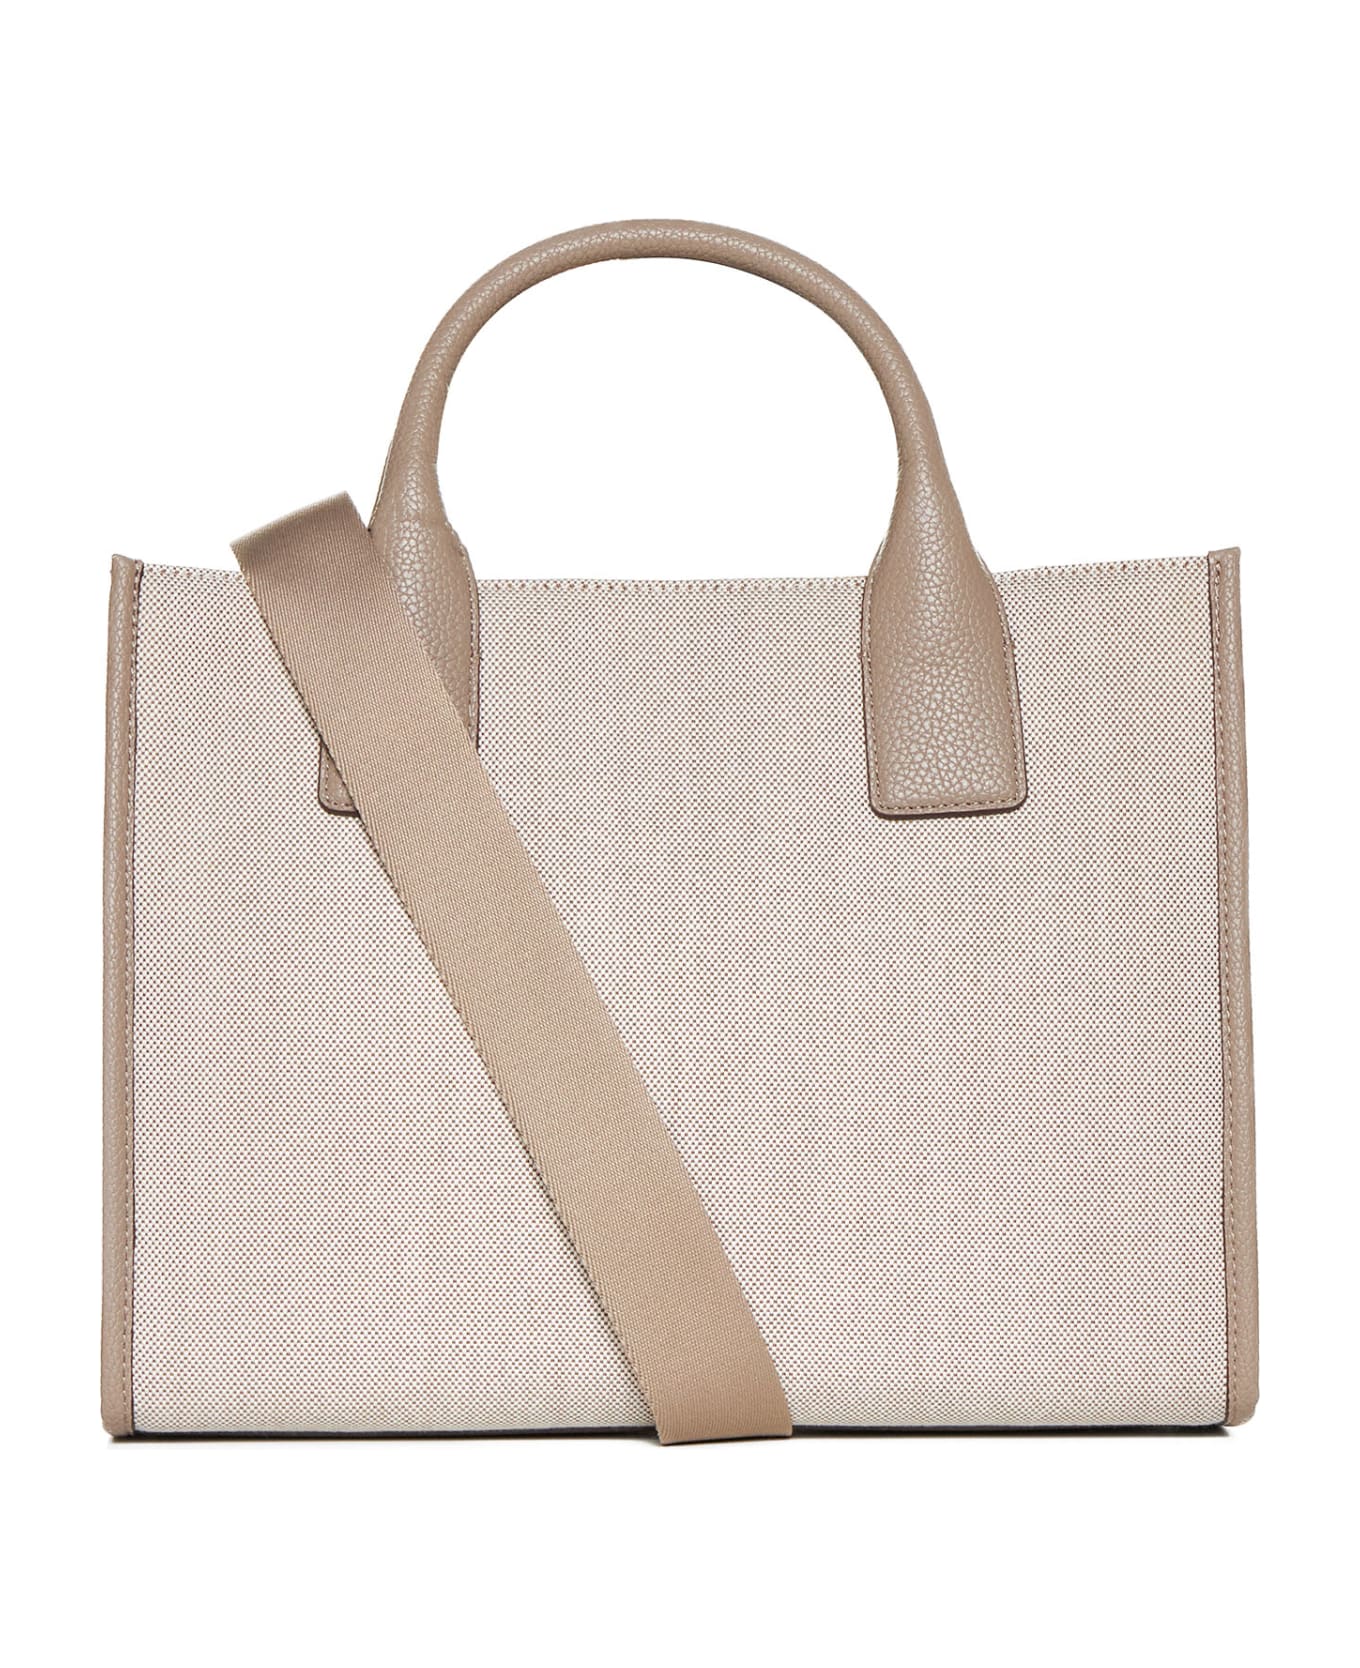 DKNY Tote - Beige トートバッグ